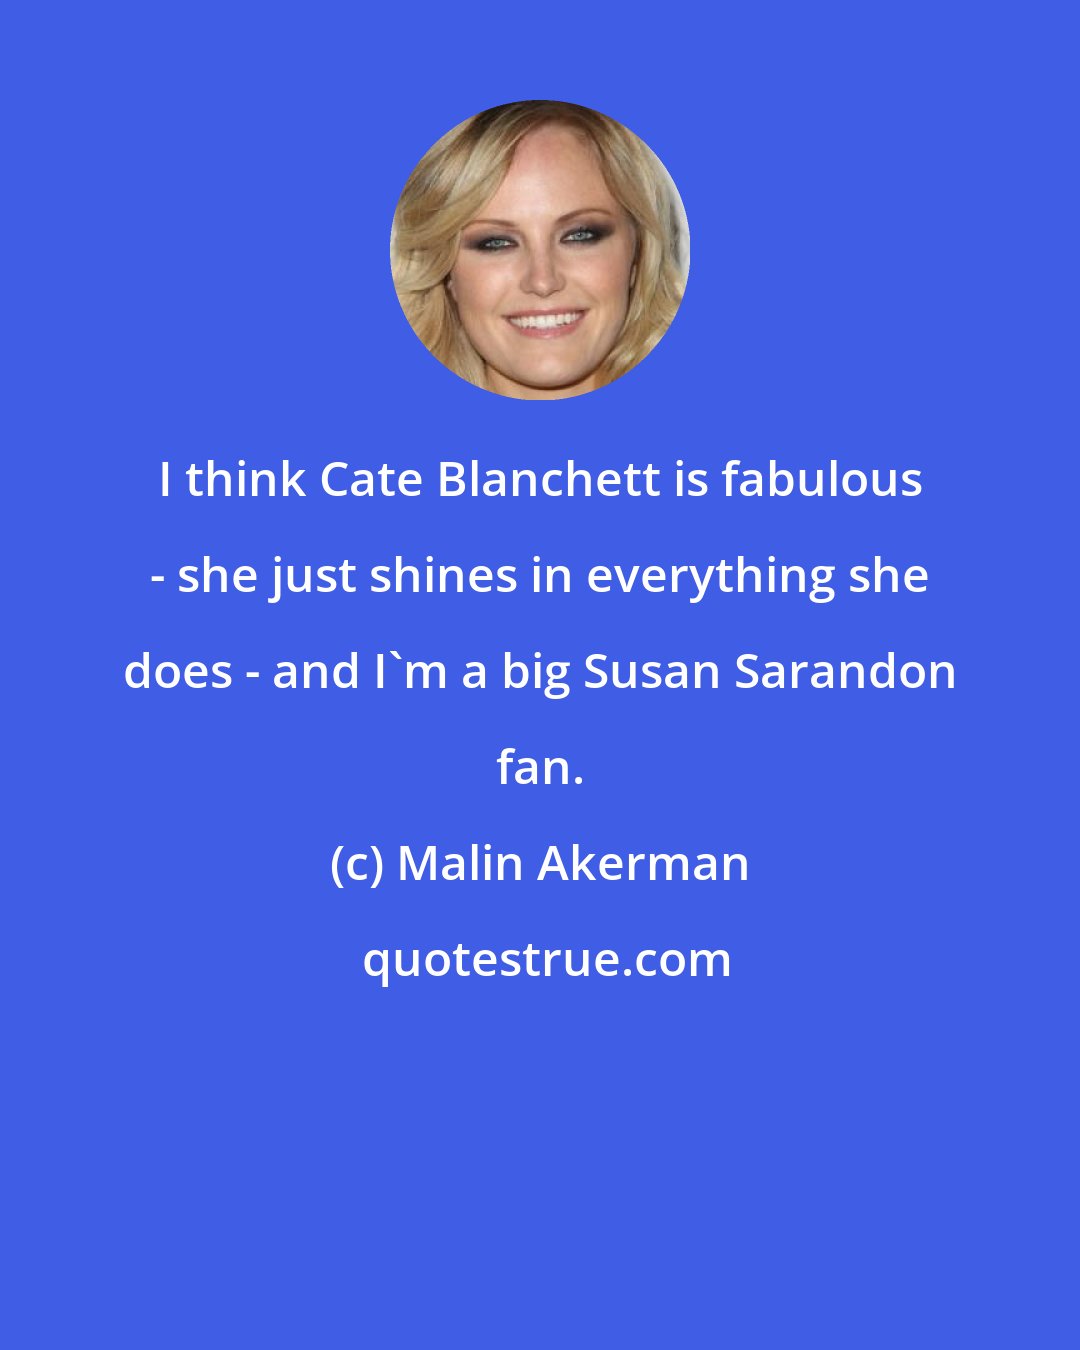 Malin Akerman: I think Cate Blanchett is fabulous - she just shines in everything she does - and I'm a big Susan Sarandon fan.